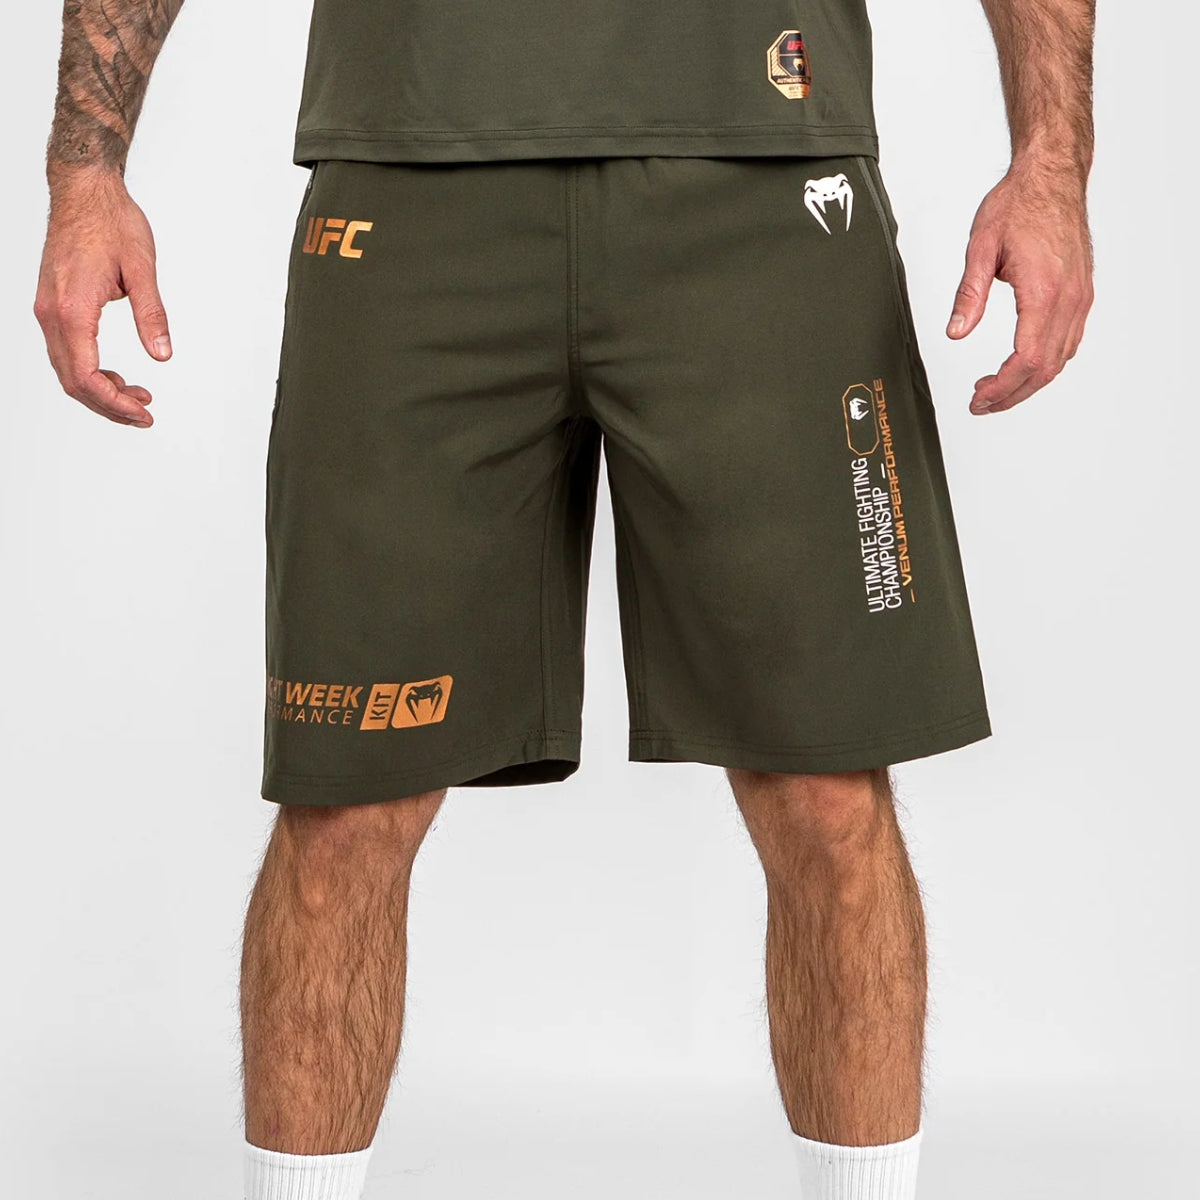 Khaki Venum UFC Adrenaline Performance Shorts from Made4Fighters